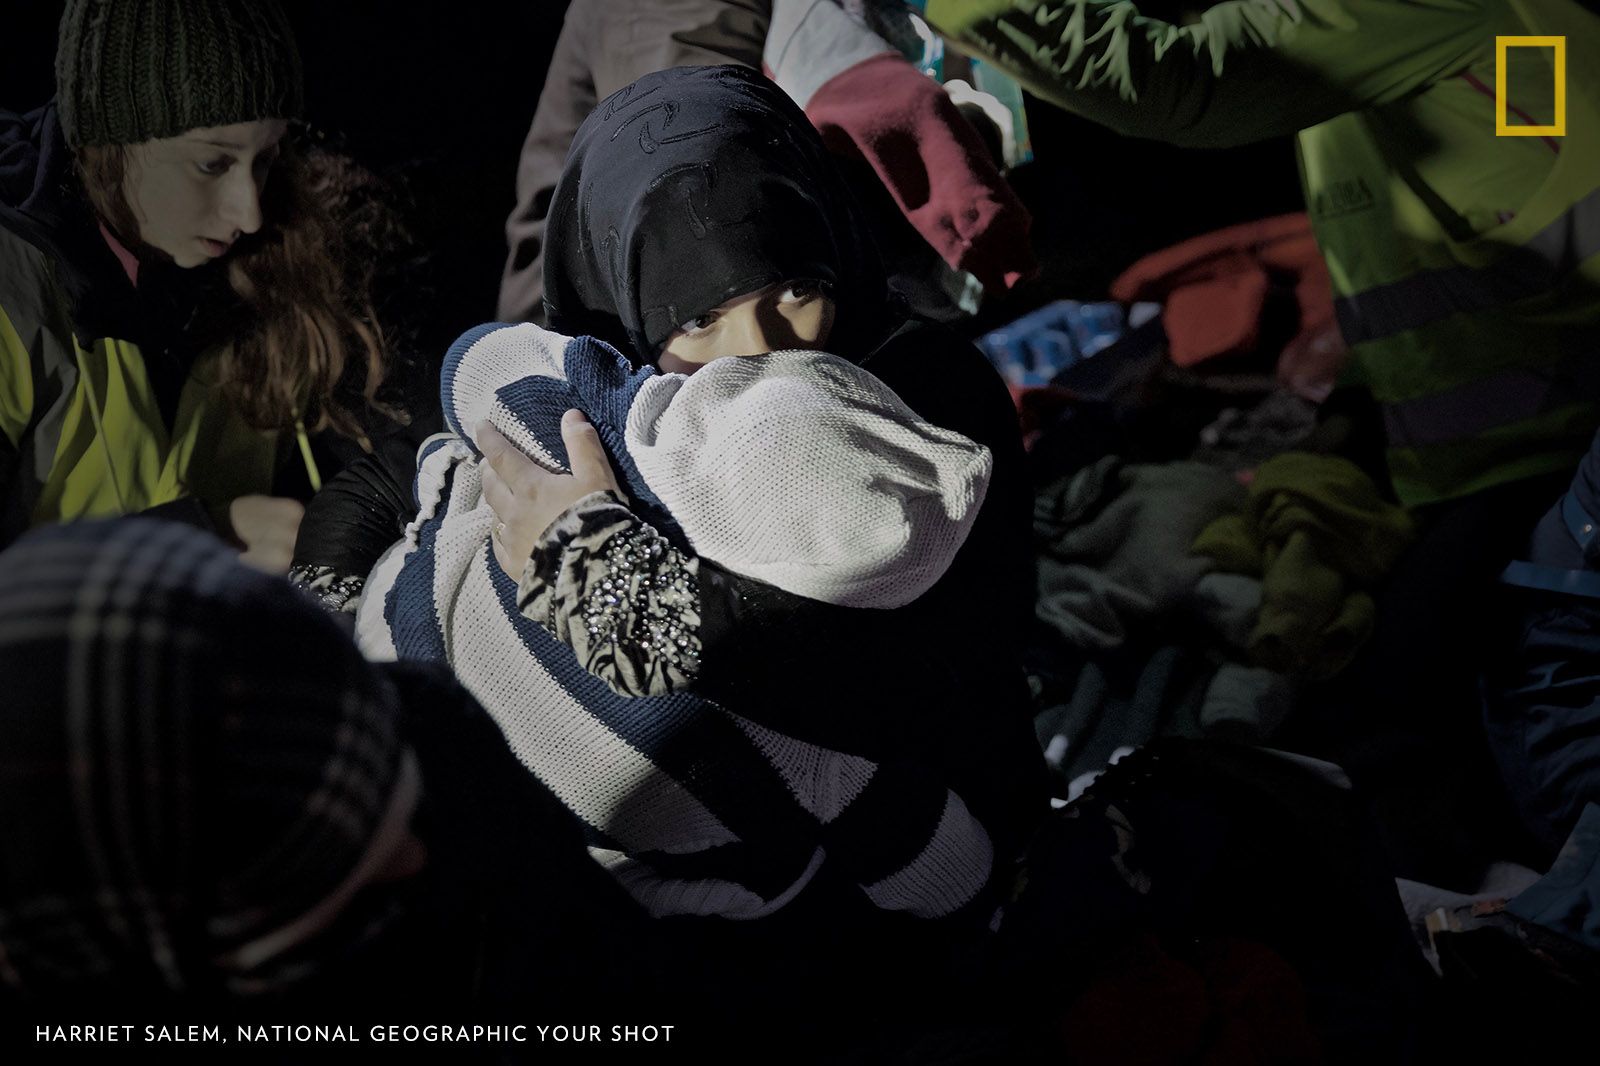 A Syrian woman cradles her crying baby on the shores of Lesbos after more than six hours at sea in a flimsy rubber dinghy.The image reminds me of the lines from Warren Shire’s poem Home: ‘You have to understand, no one puts their children in a boat unless the water is safer than the land.’ Image by Harriet Salem. Greece.